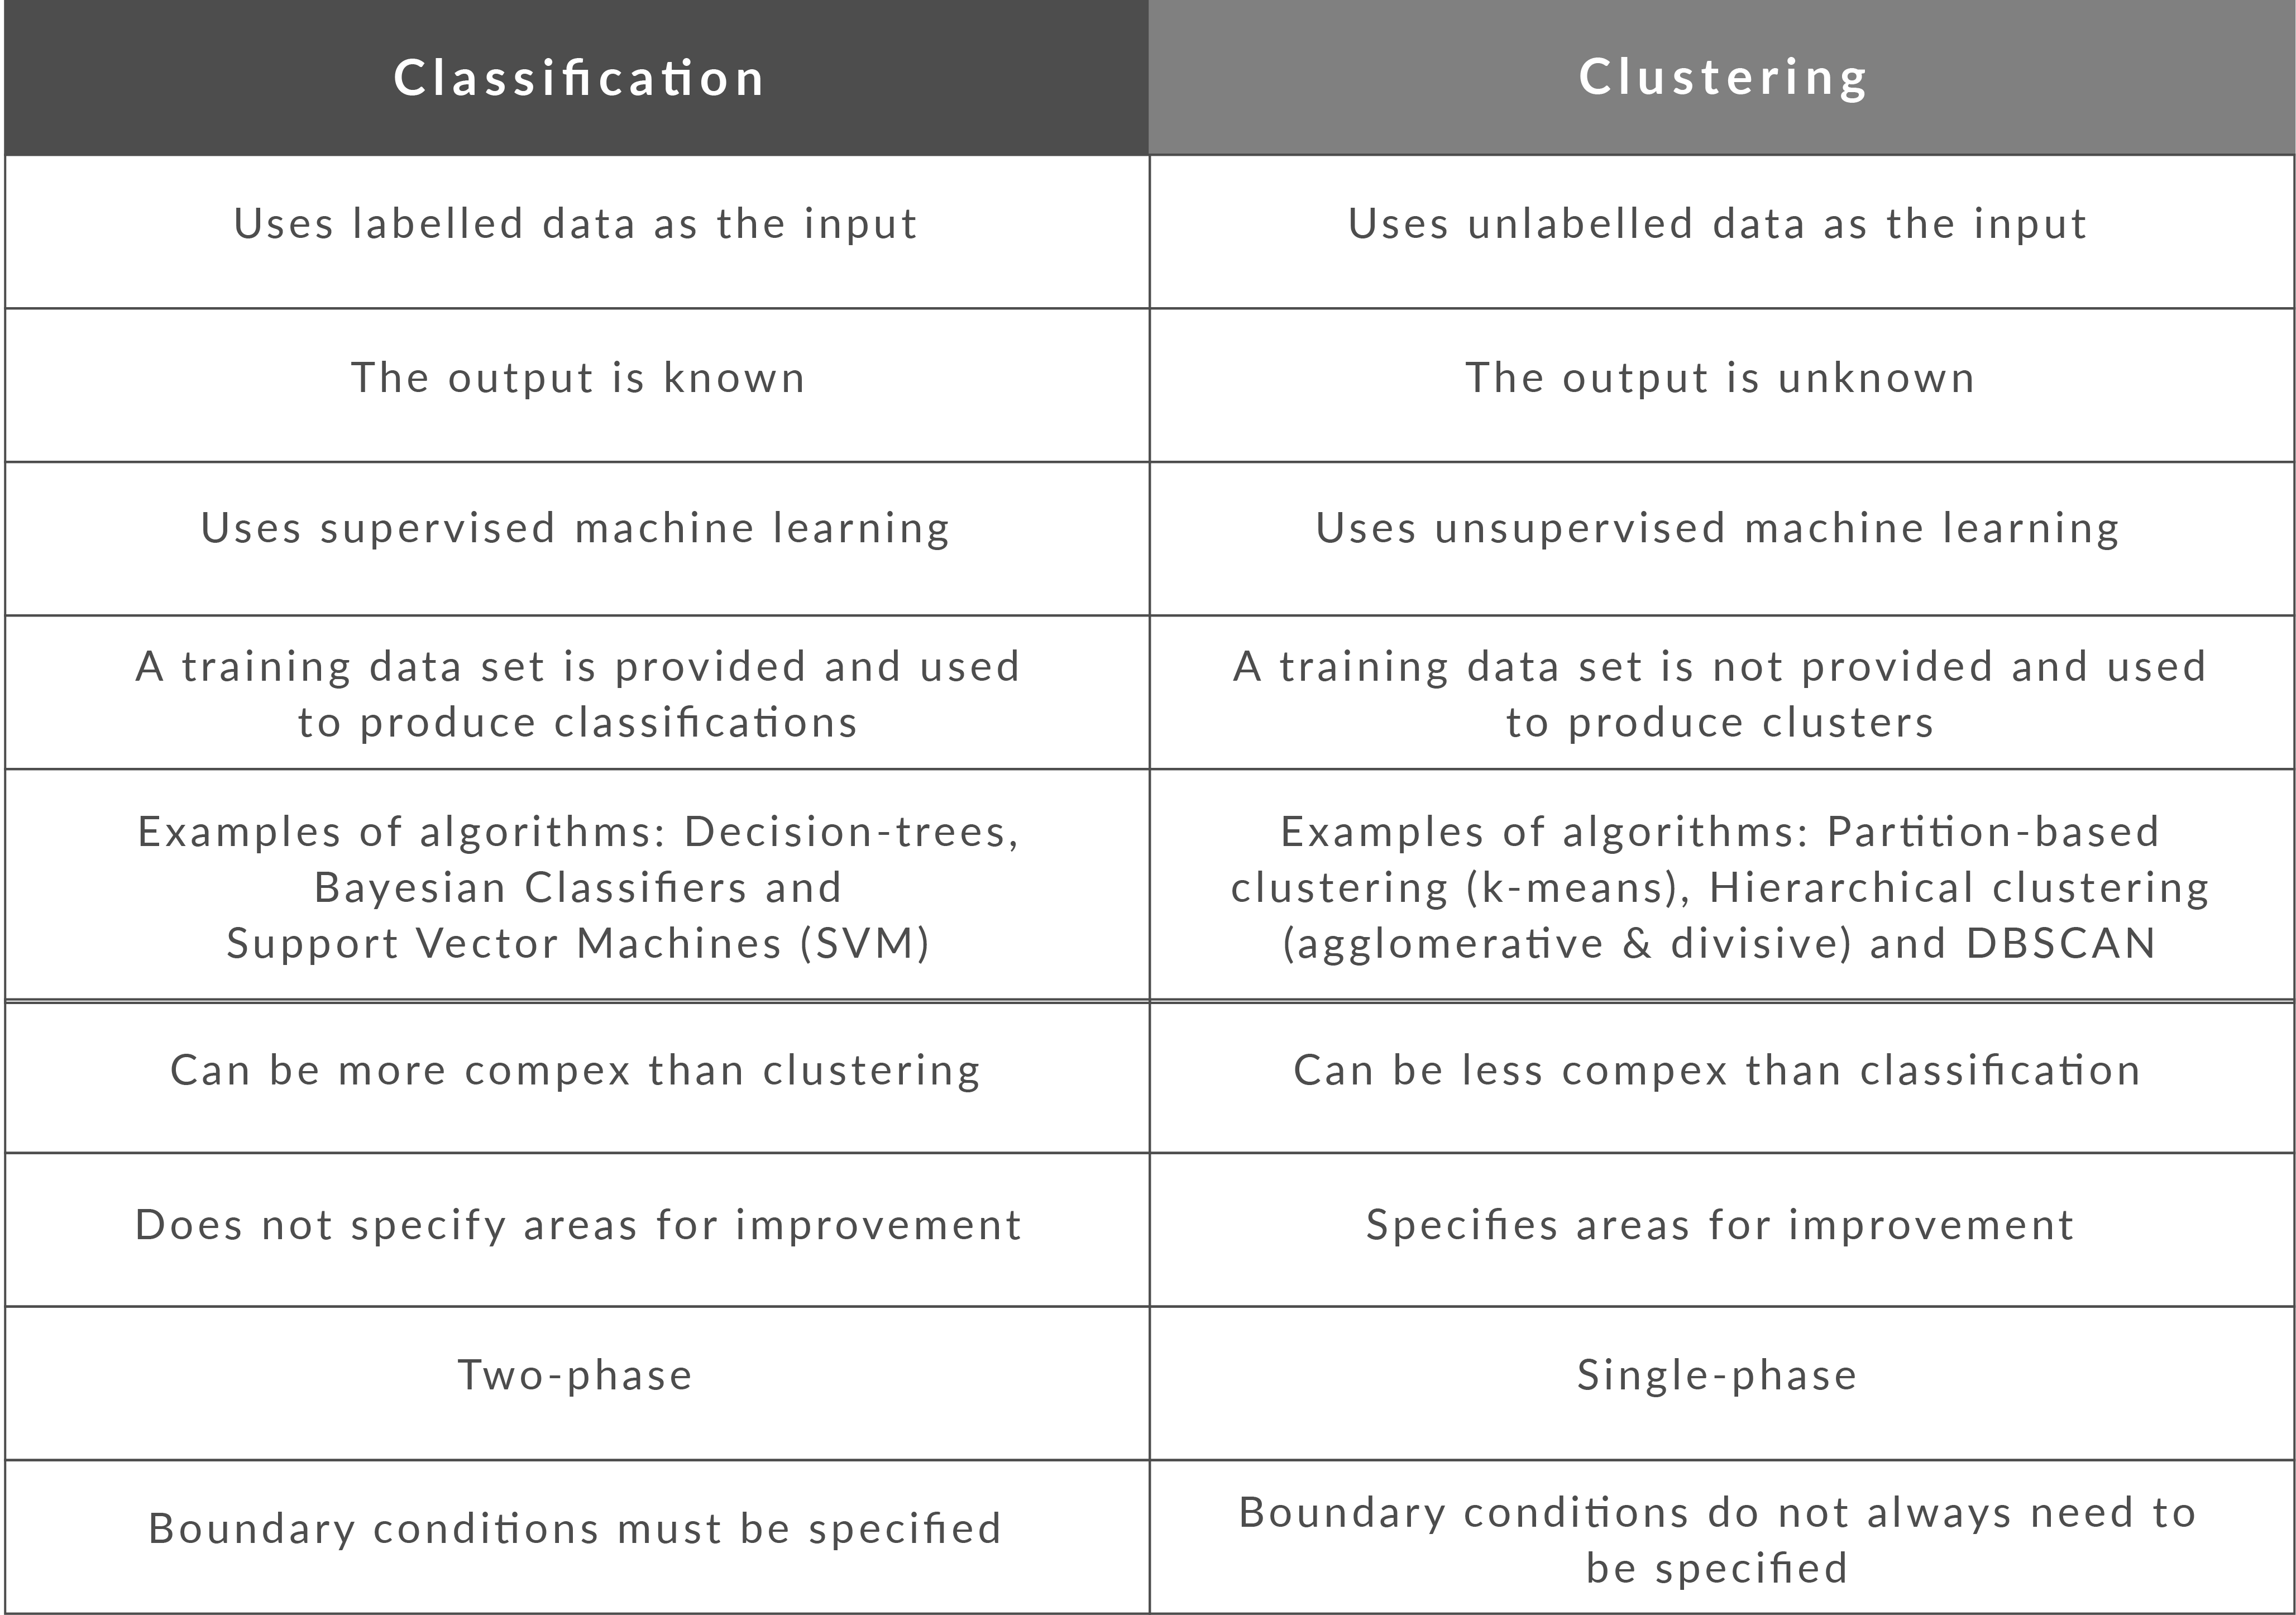 What is the main difference between clustering and classification?